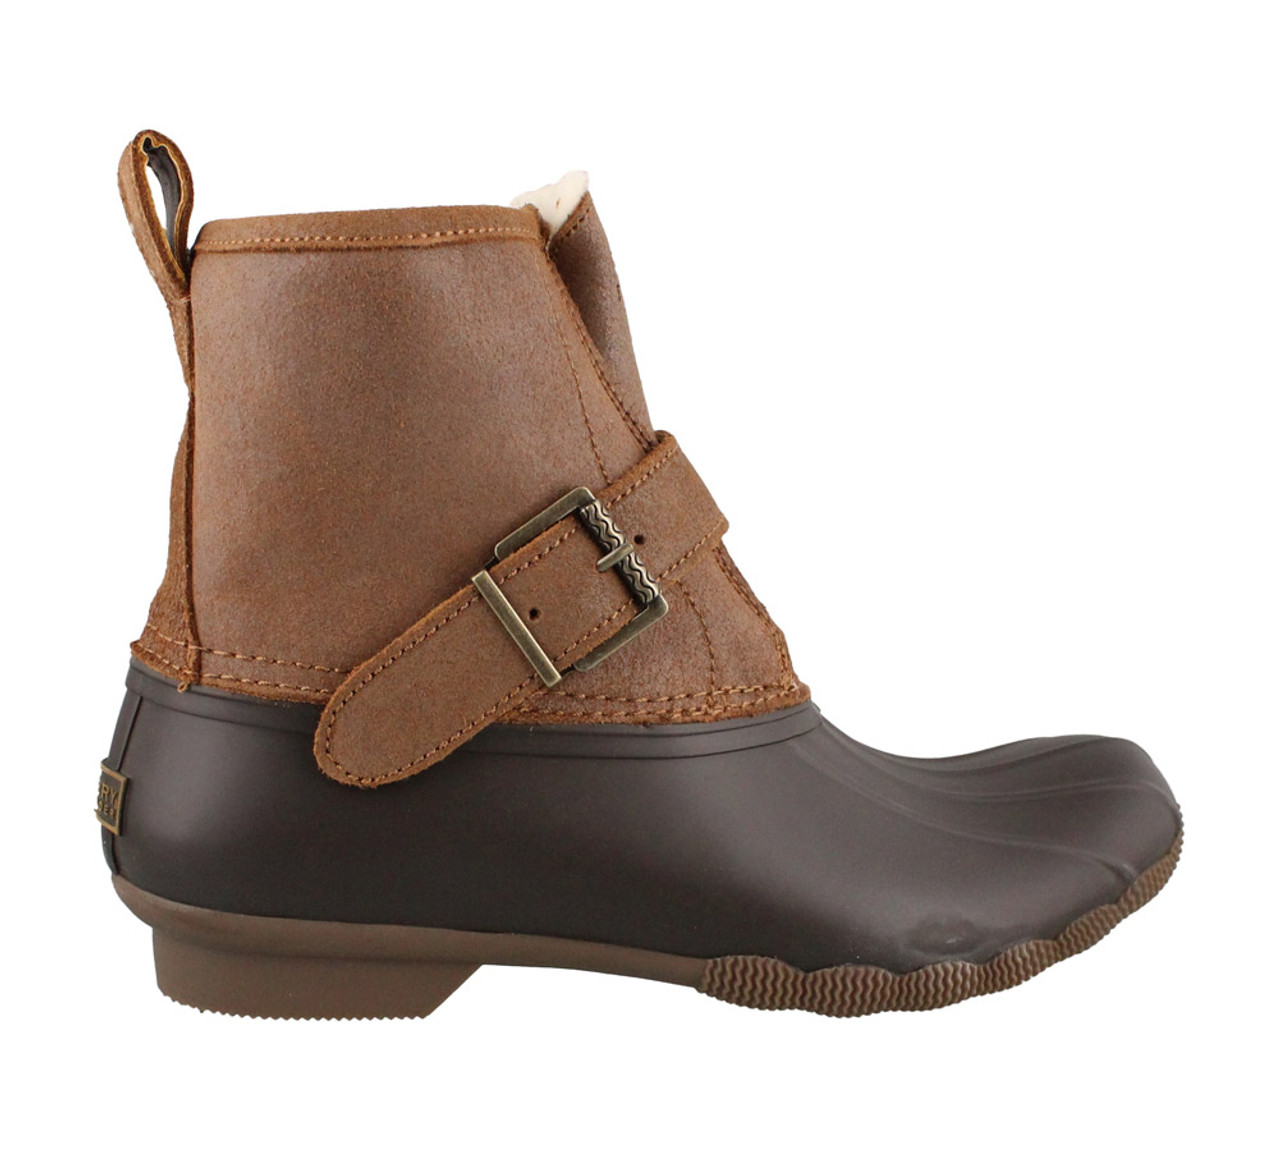 sperry rip water duck boots